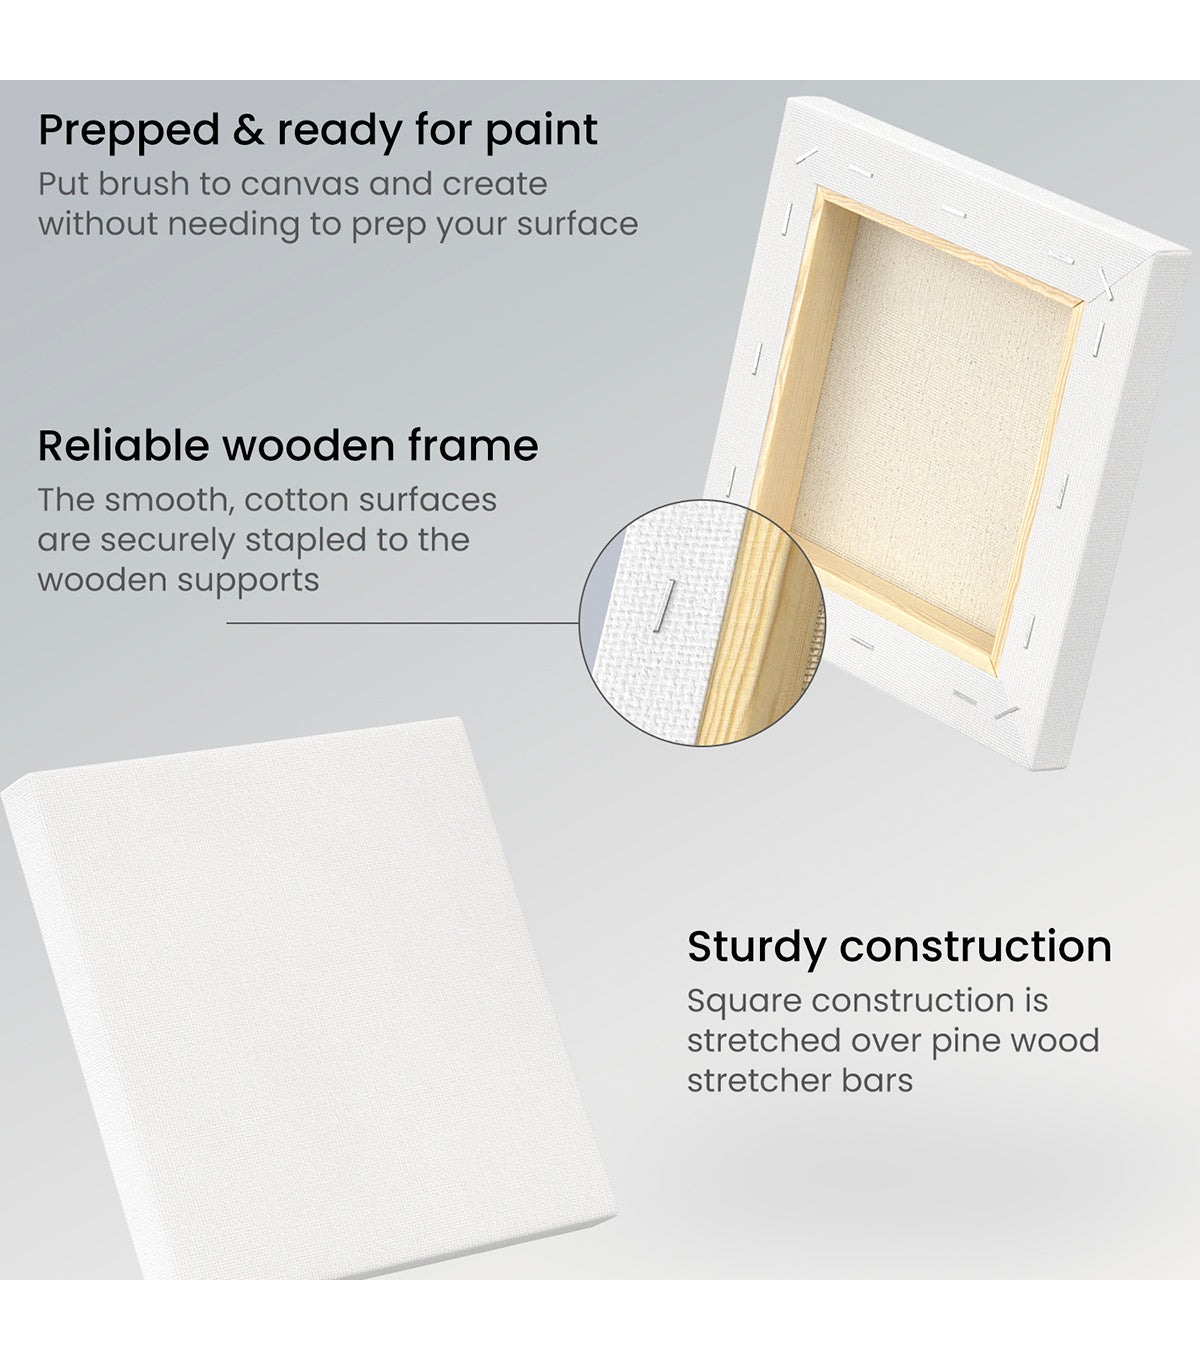 Wholesale pre primed canvas With Ideal Features For Painting